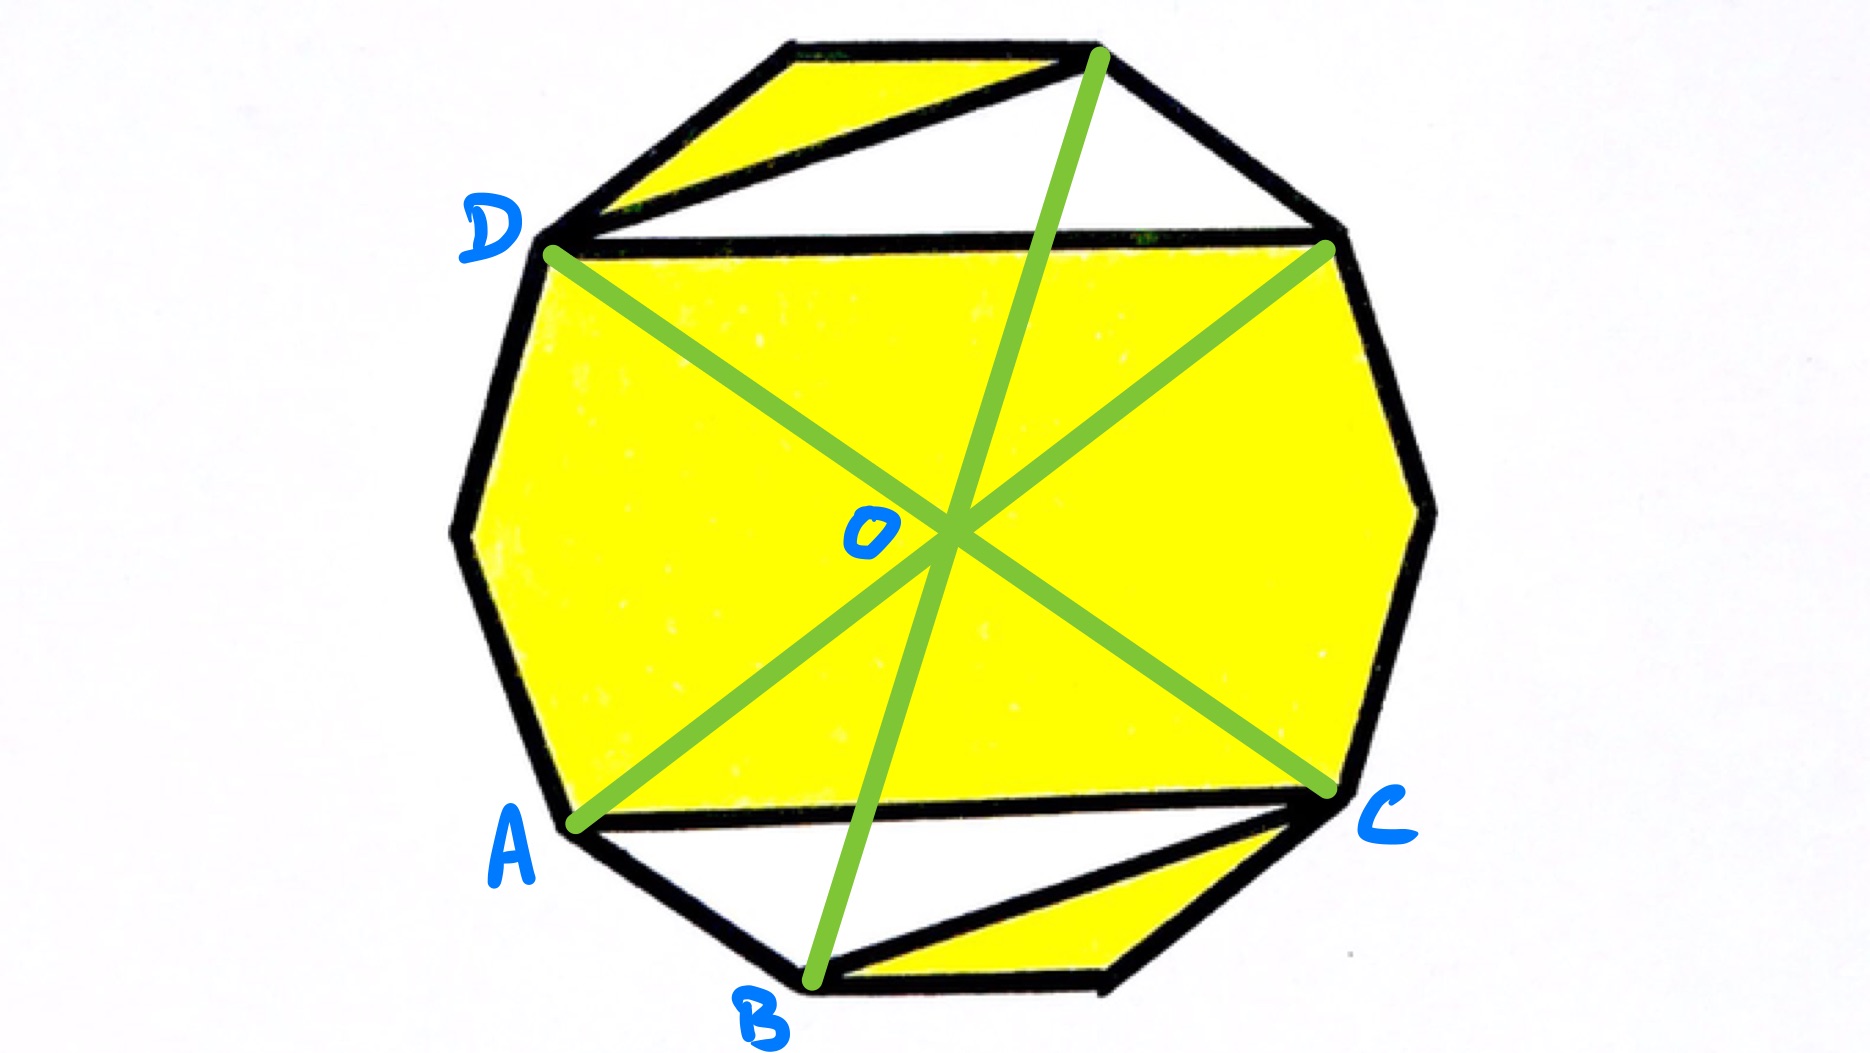 Subdivided decagon labelled